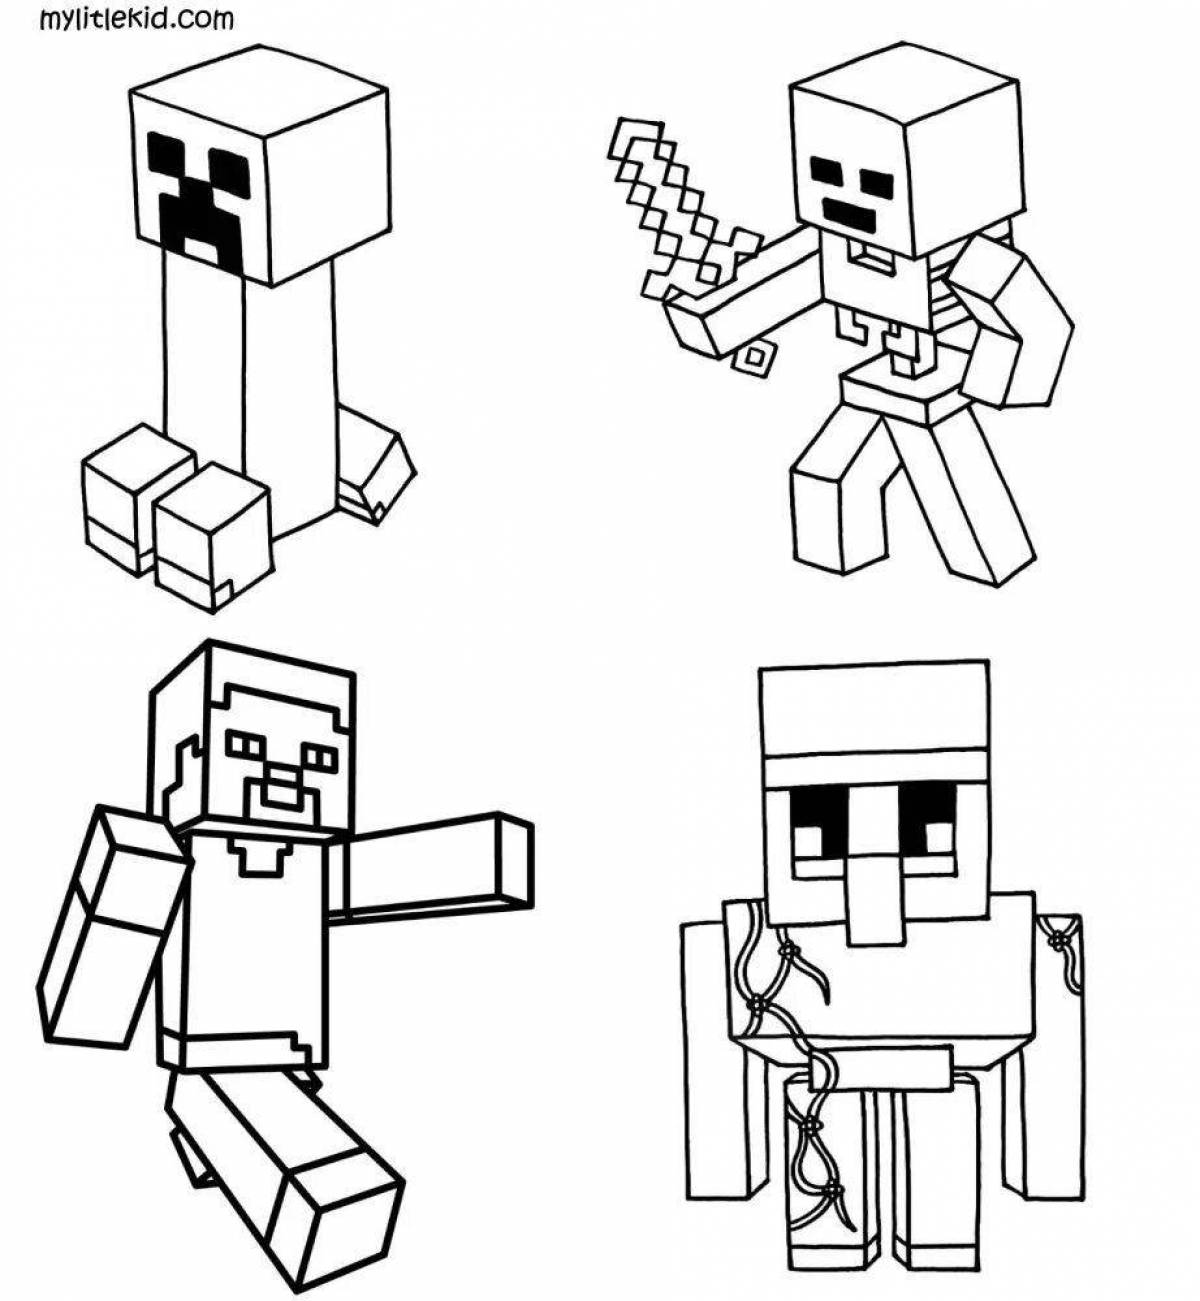 Incredible minecraft mobs coloring page